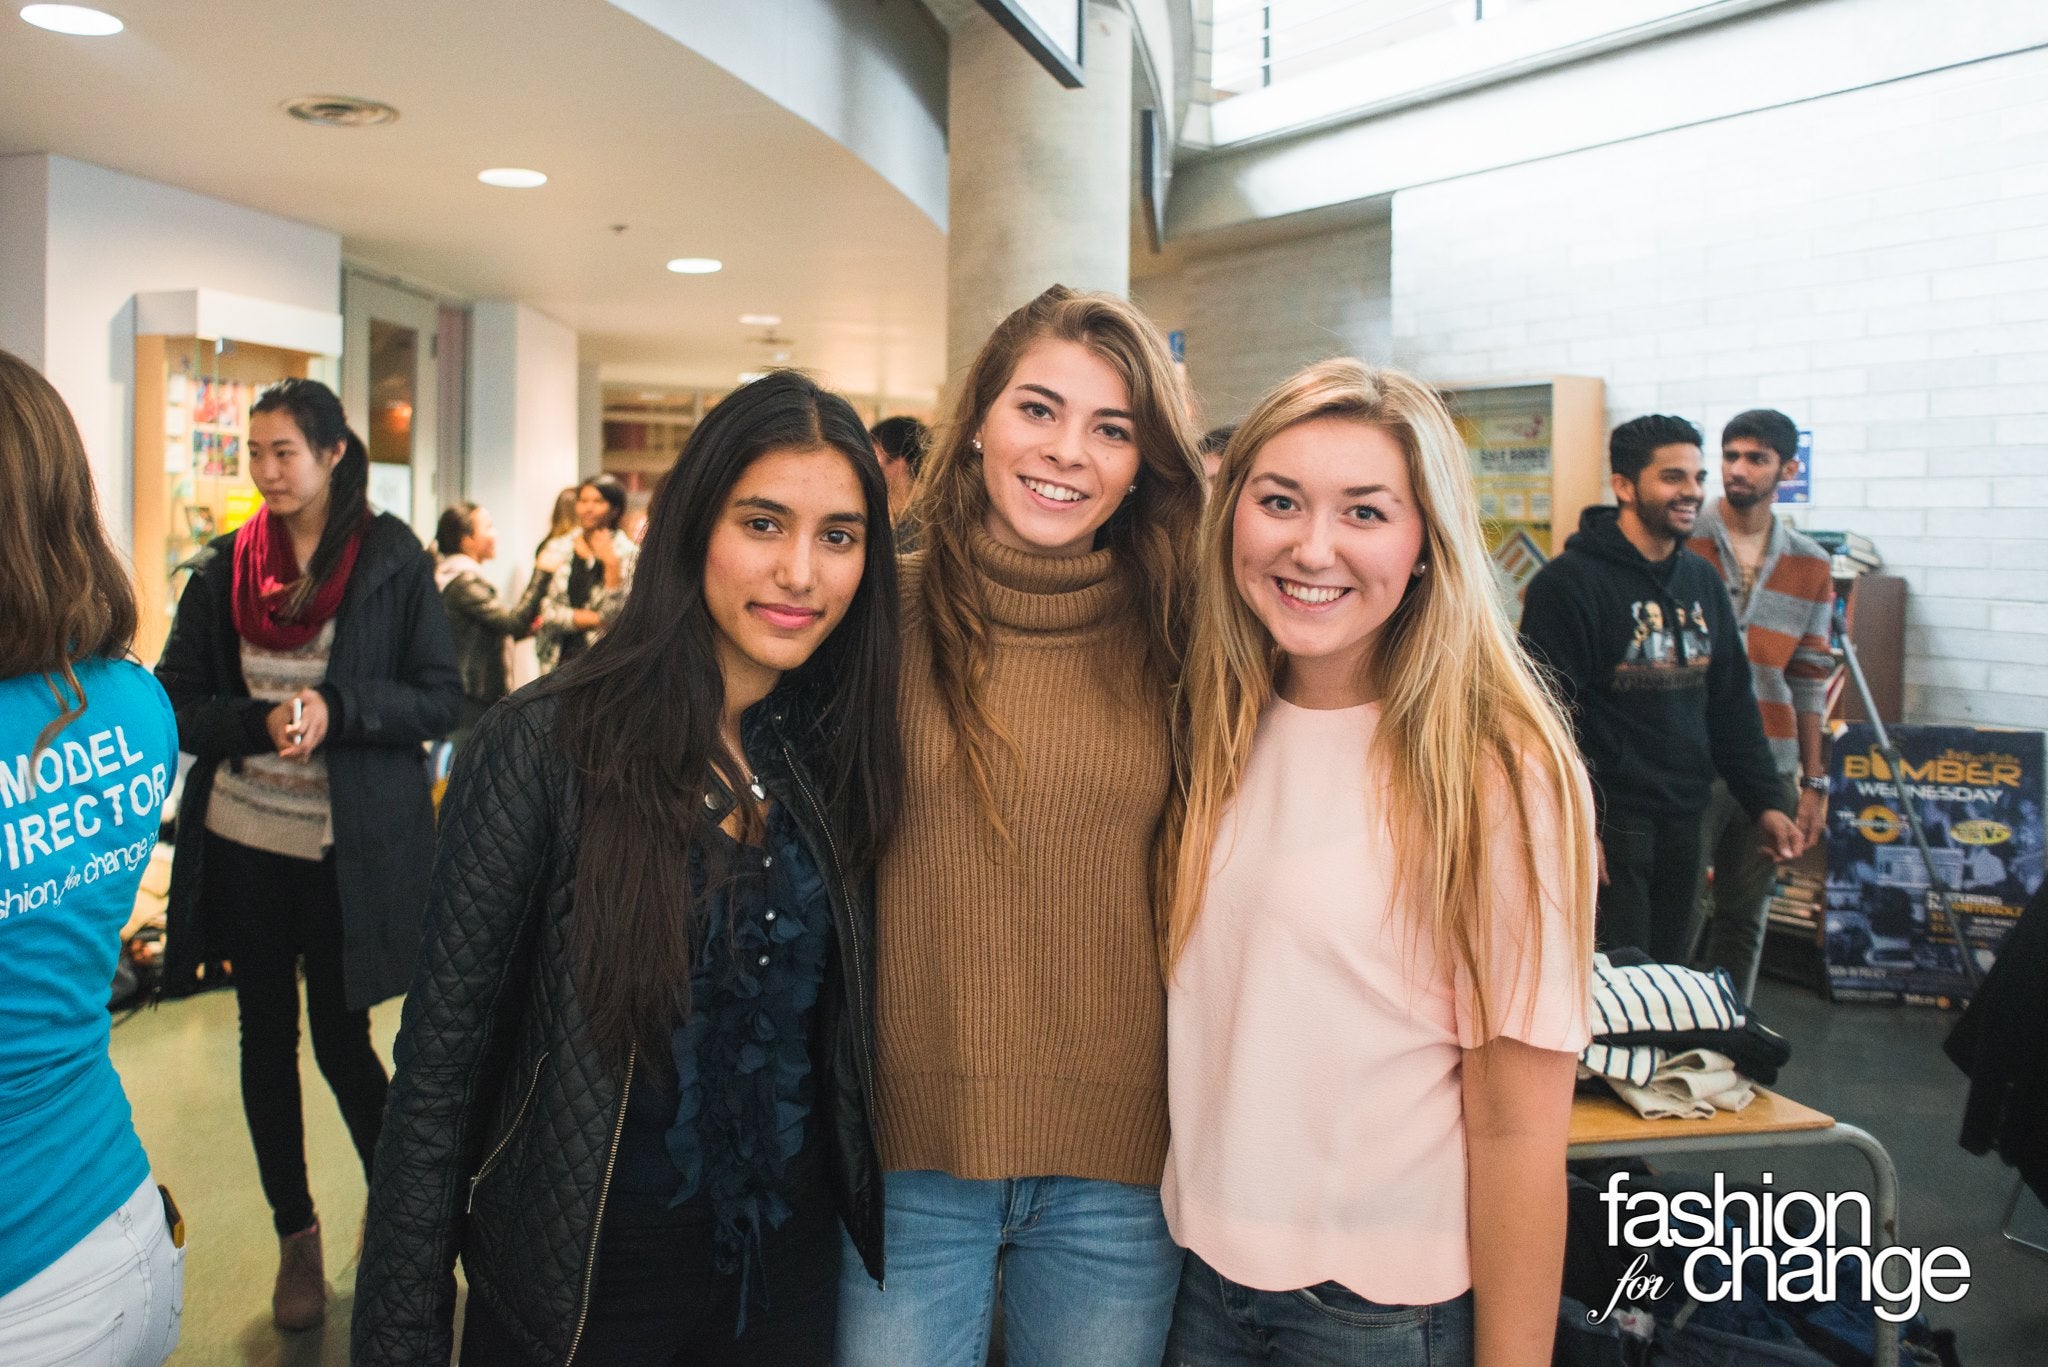 Alisha poses with two friends at a Fashion for Change event.